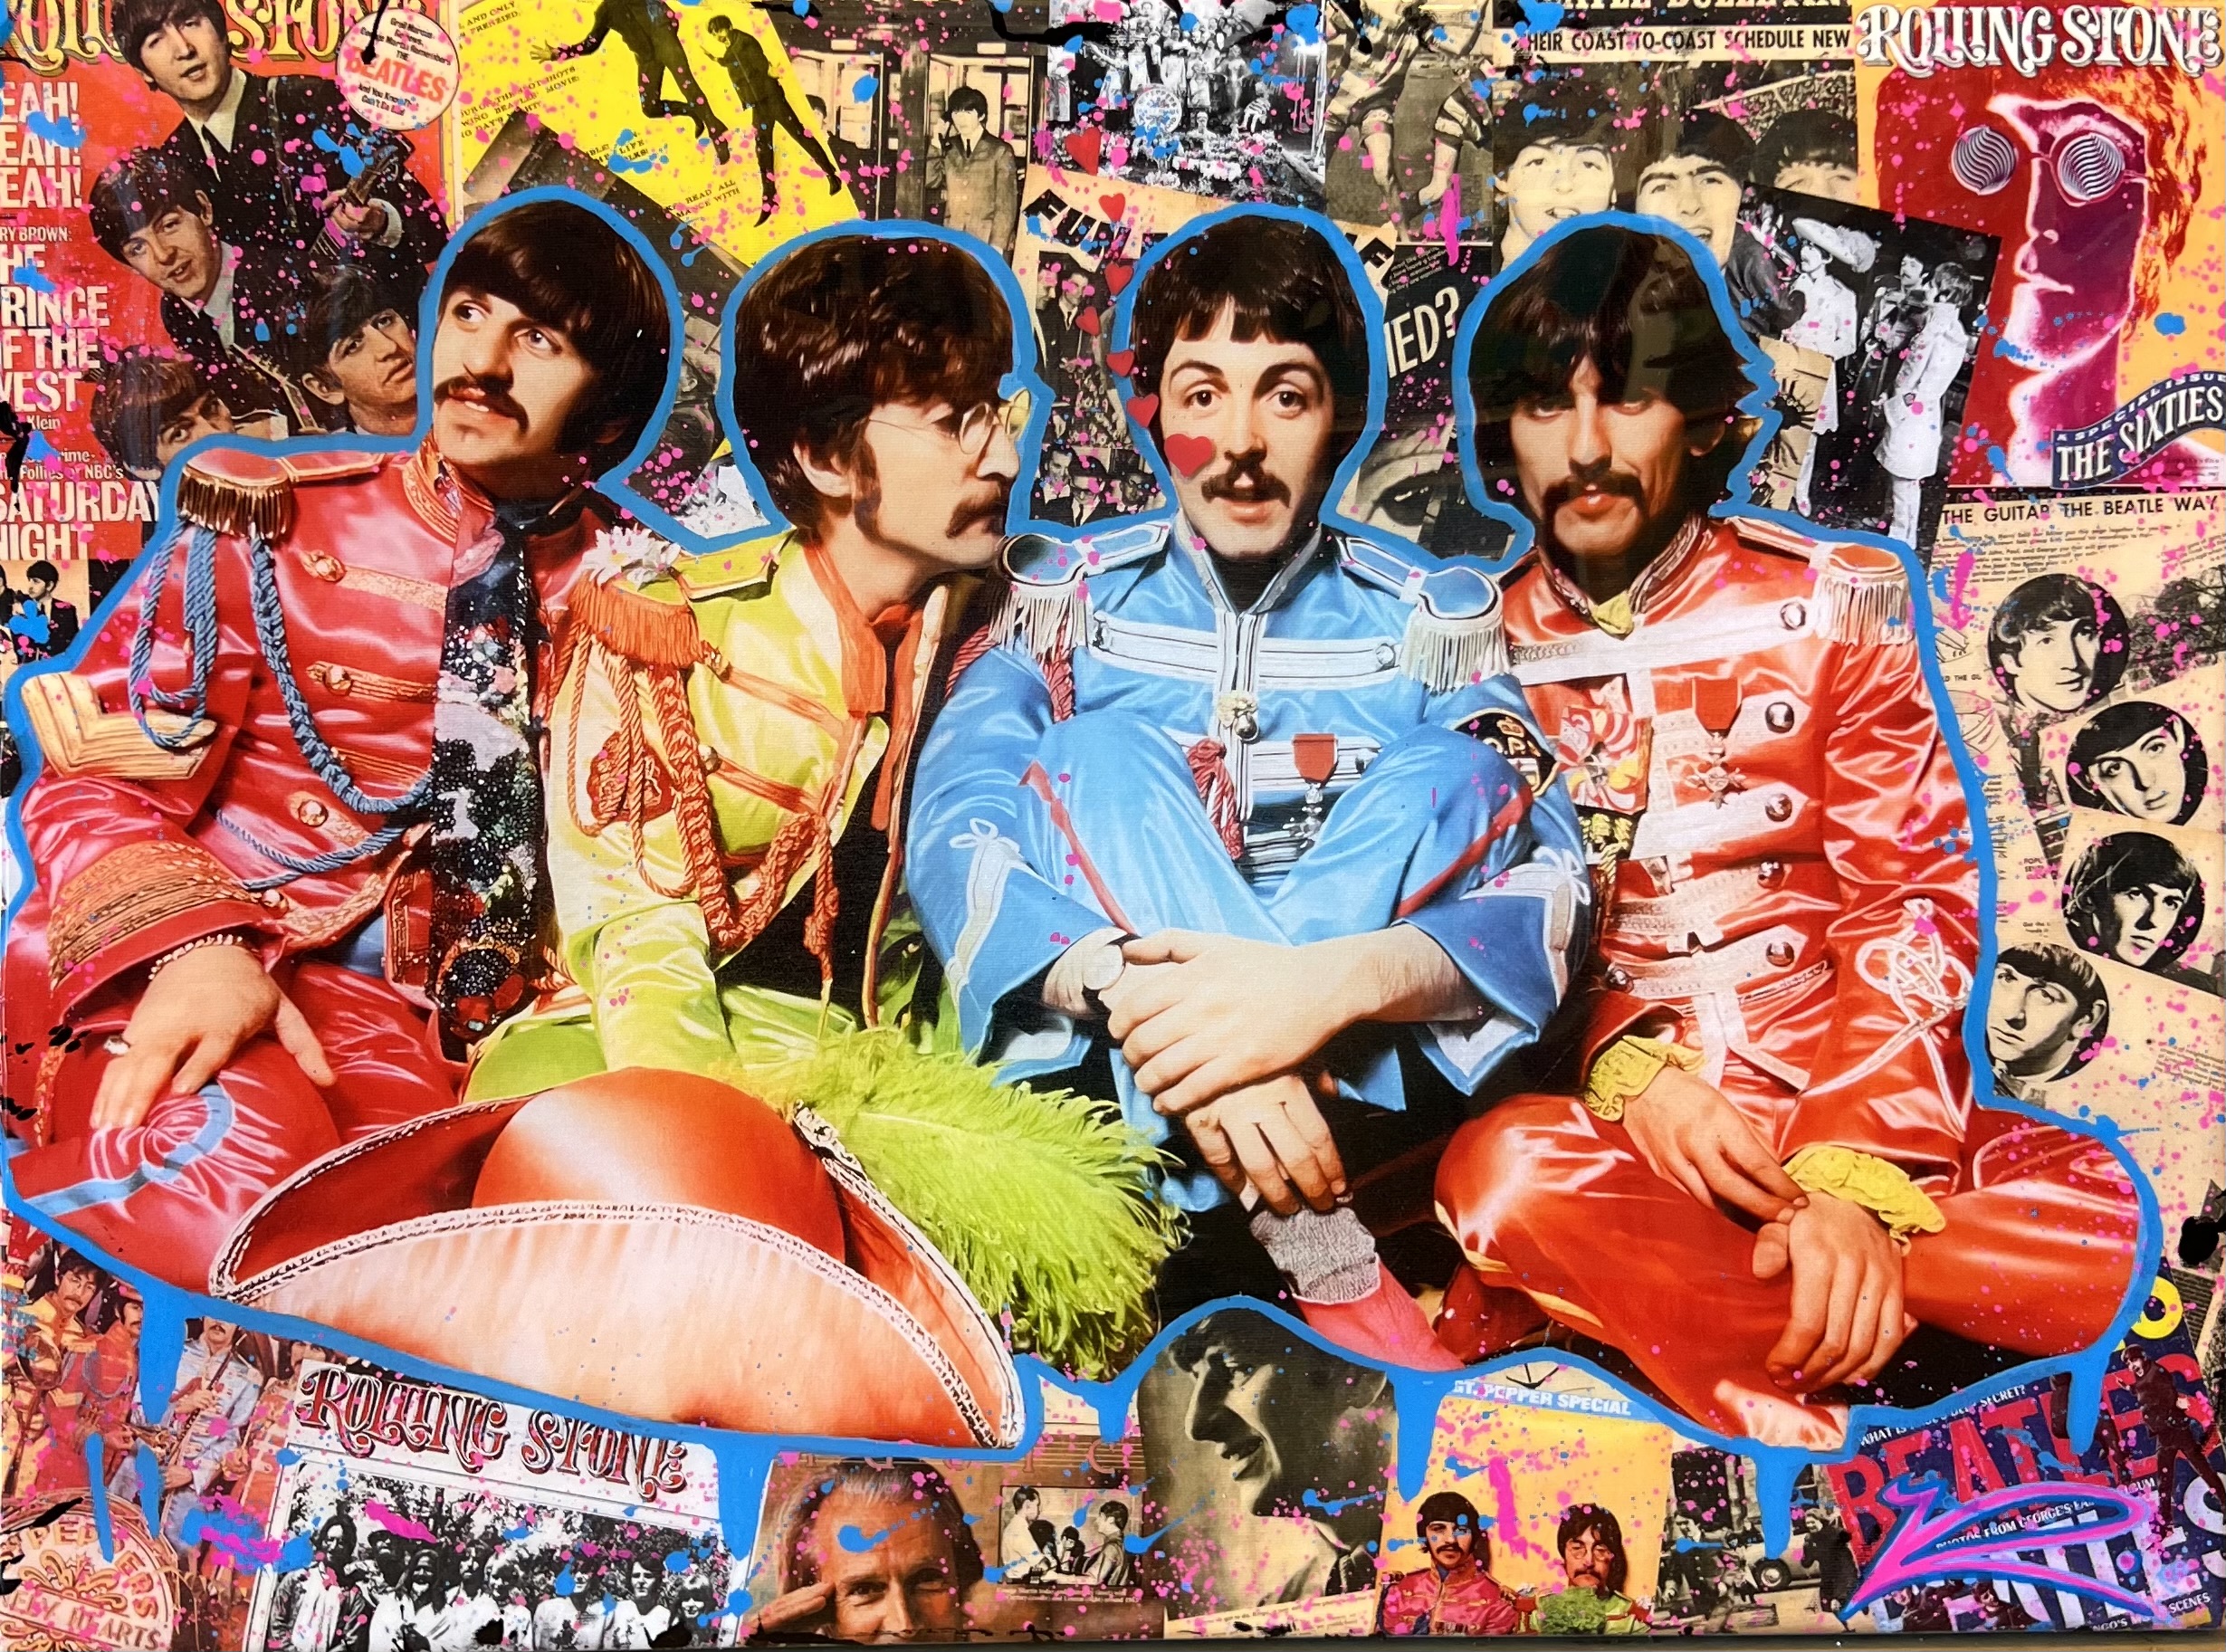 The Beatles hand-embellished giclee on canvas with resin coating